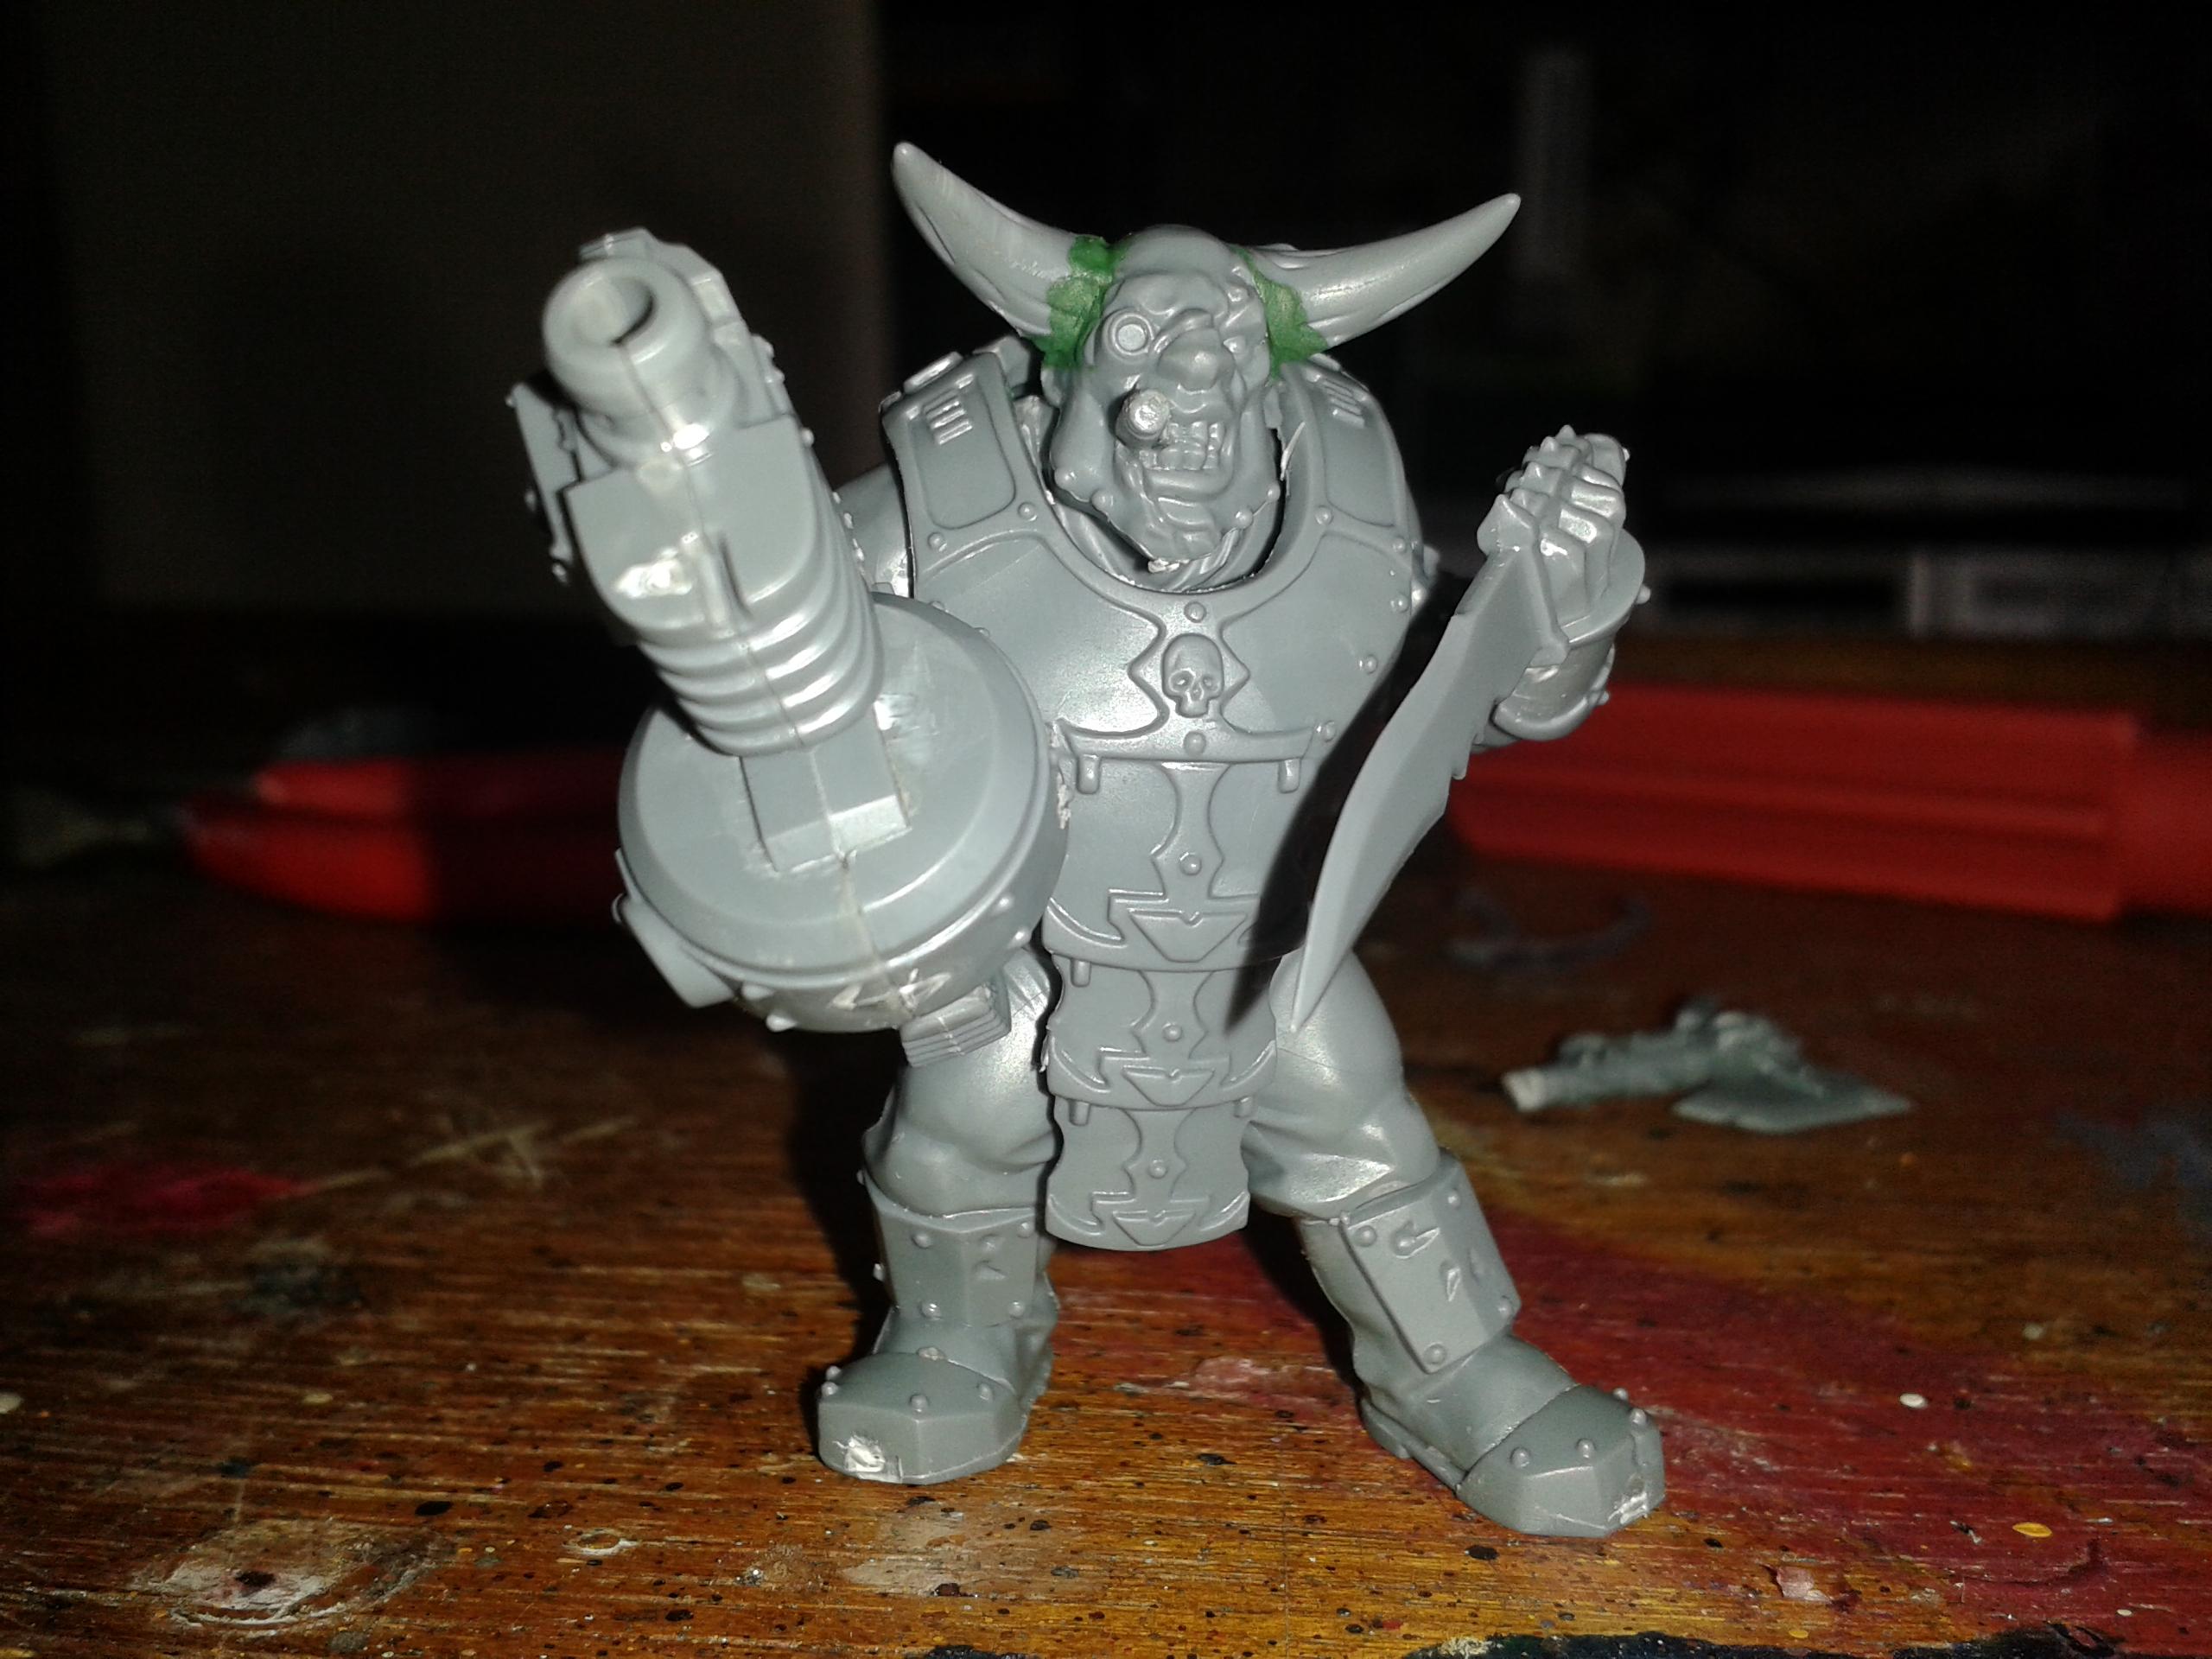 some minor conversion work, and Nork Deddog is ready for primer